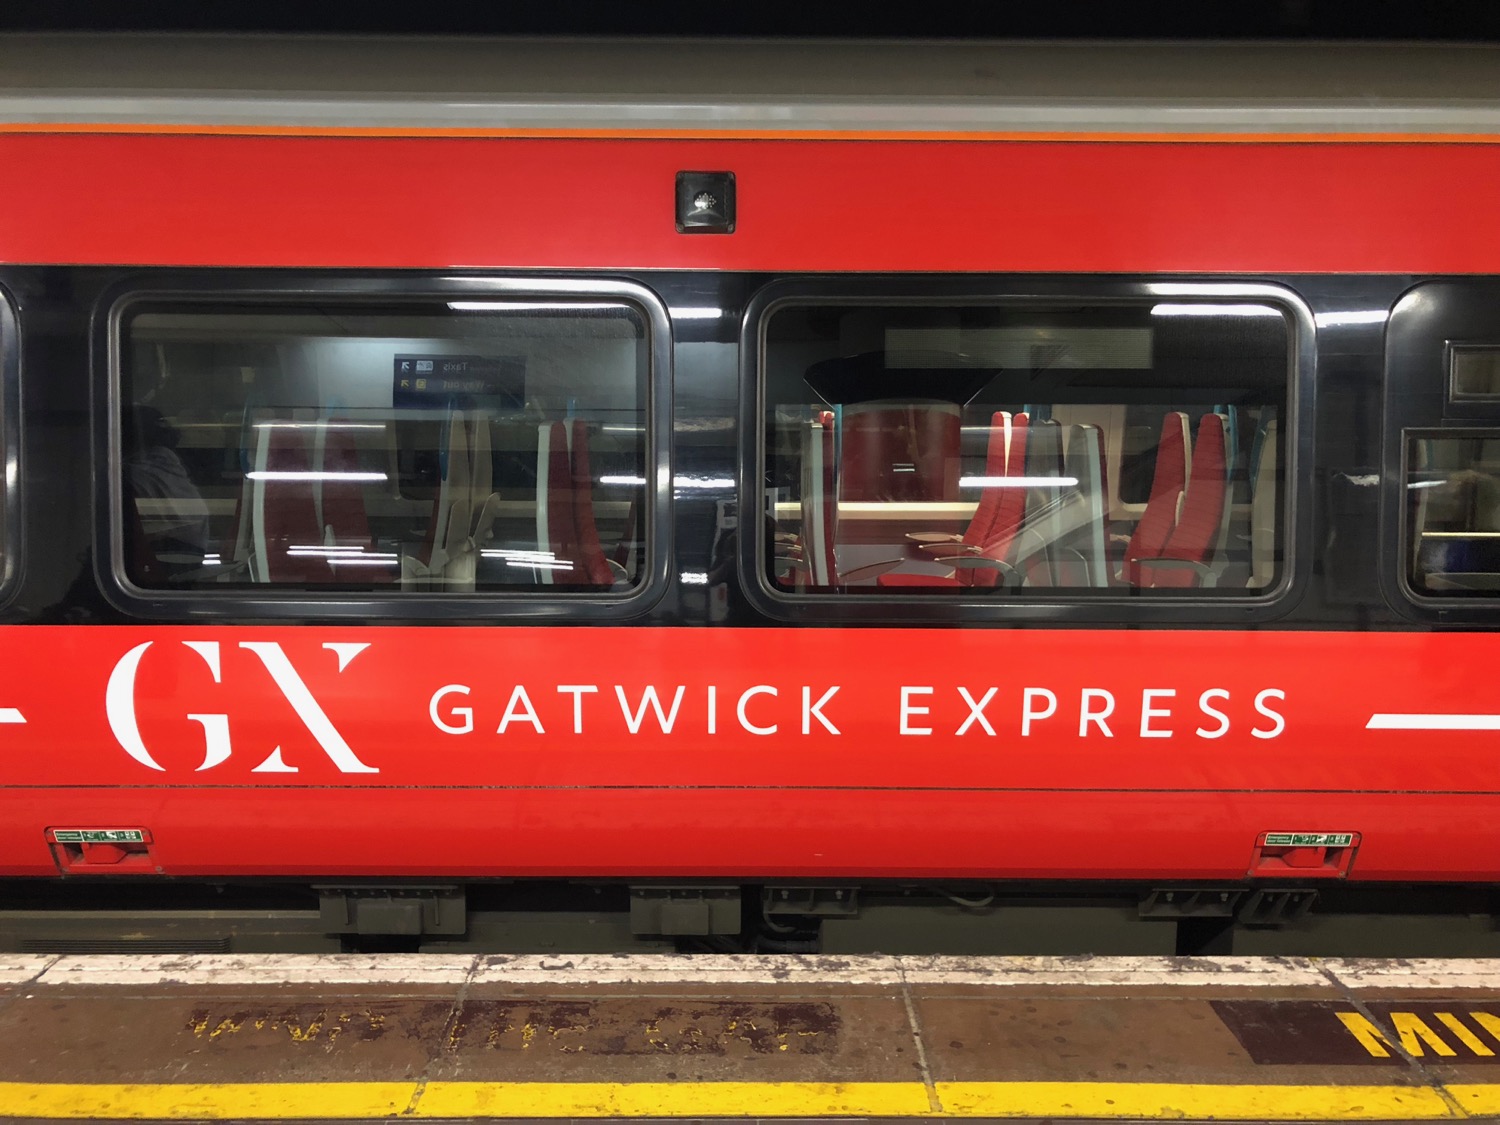 Gatwick Express From Central London To LGW - Live and Let's Fly